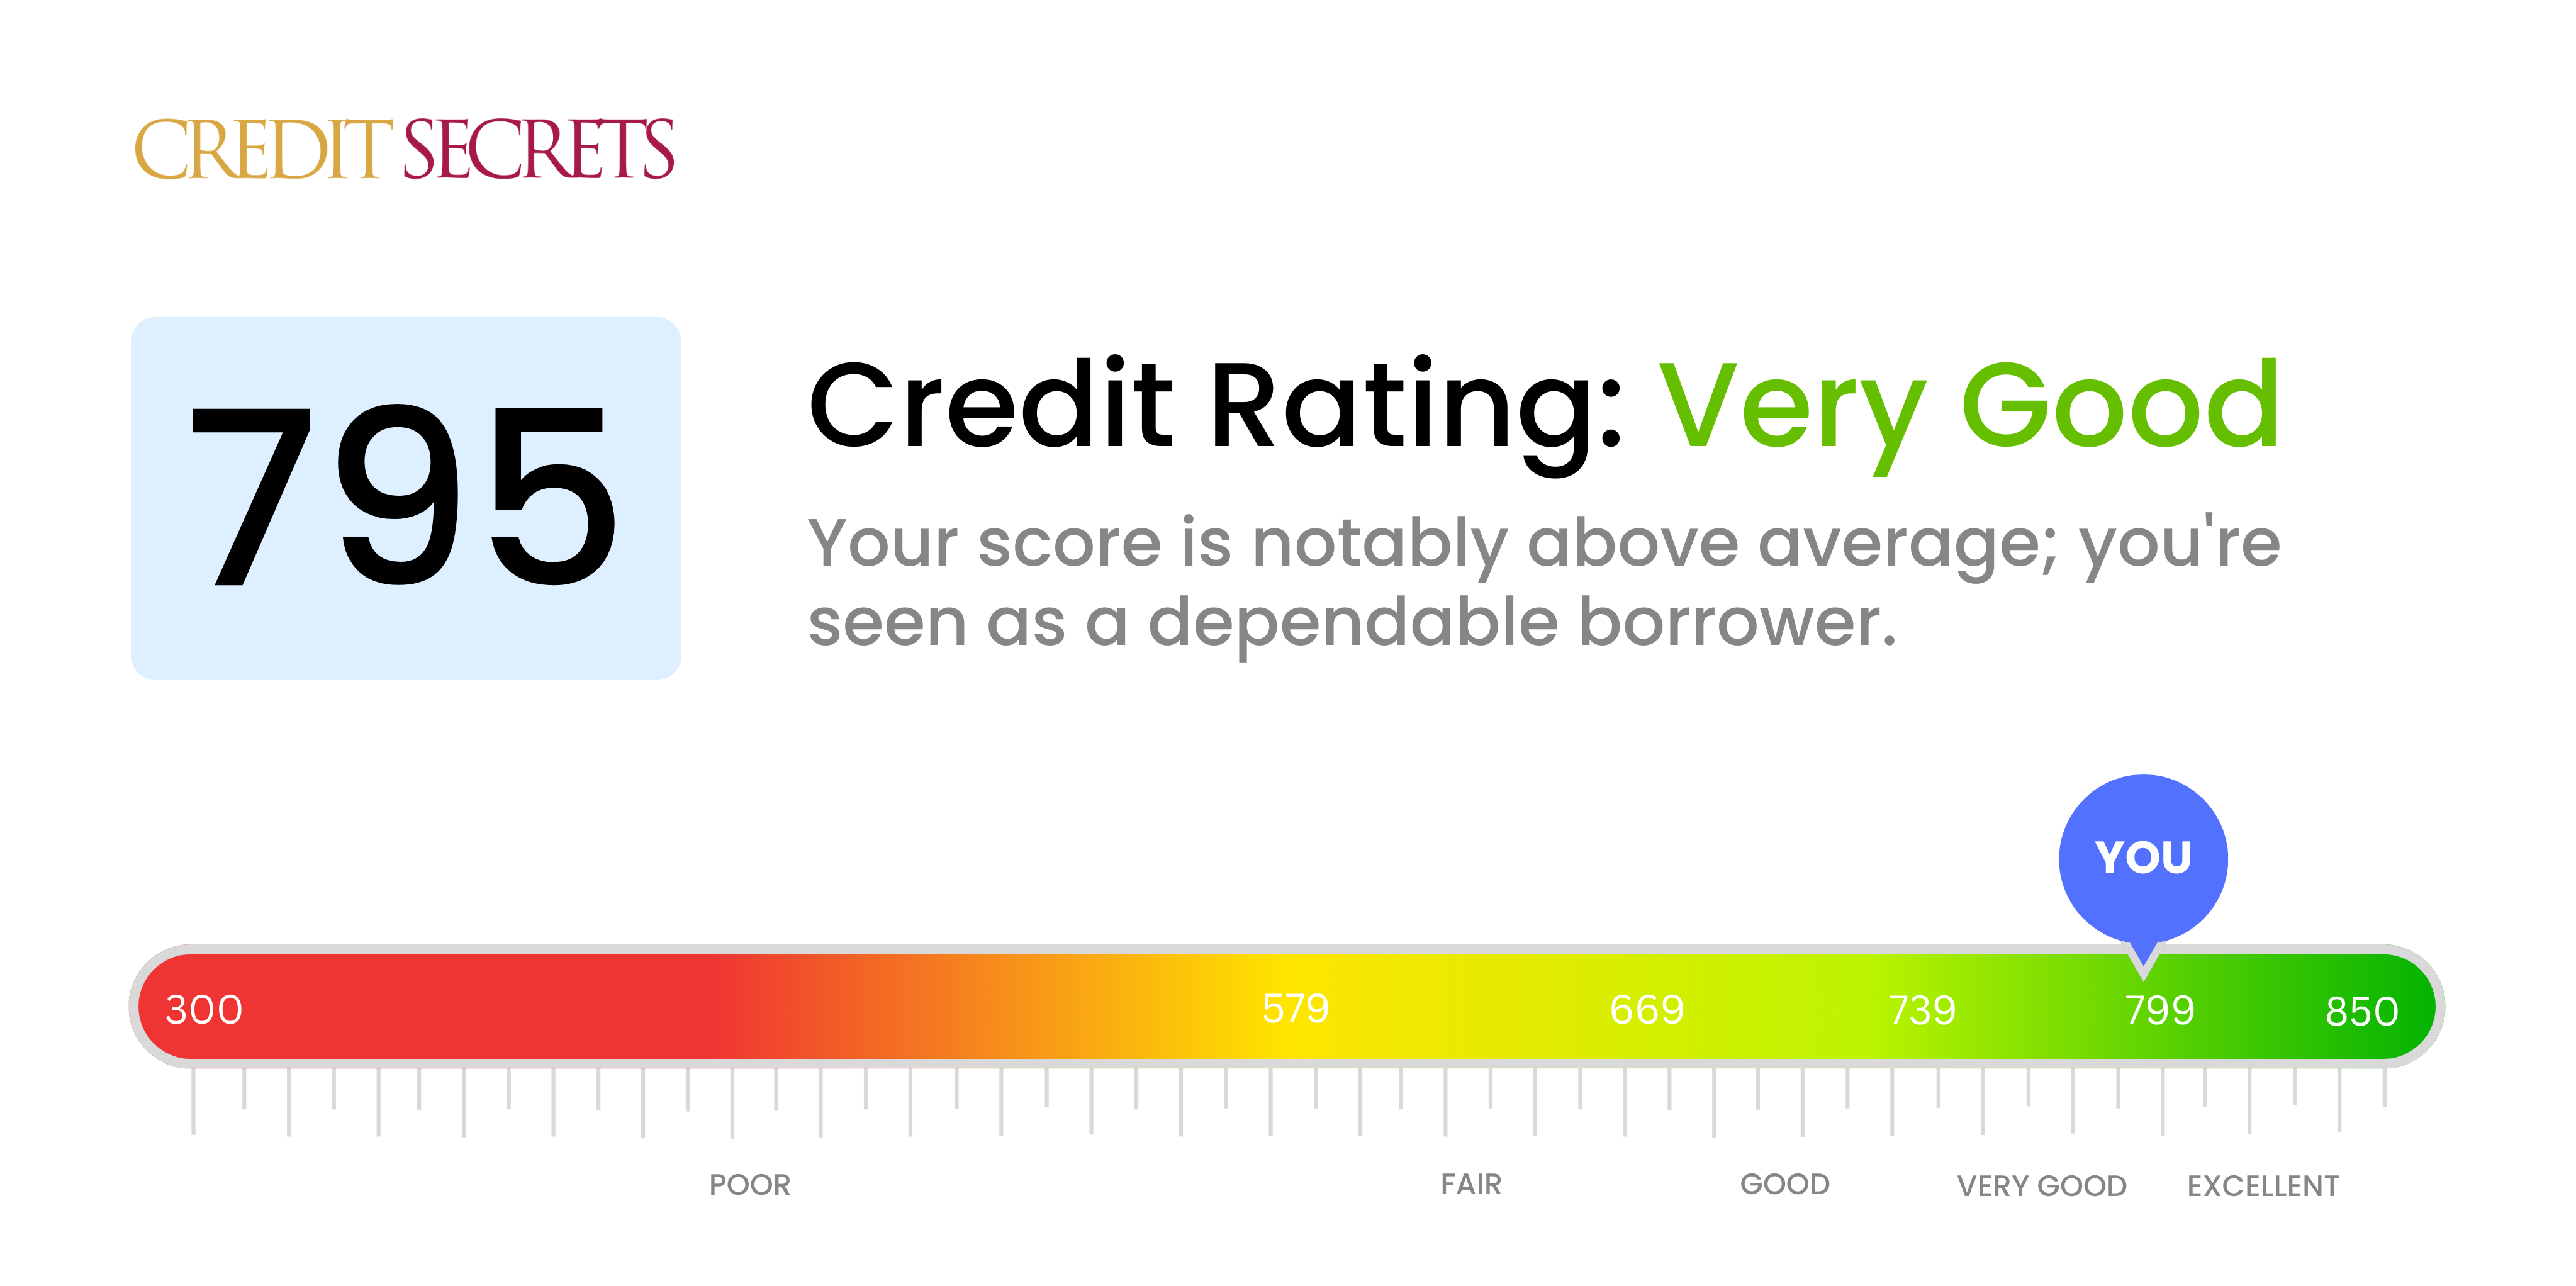 Is 795 a good credit score?